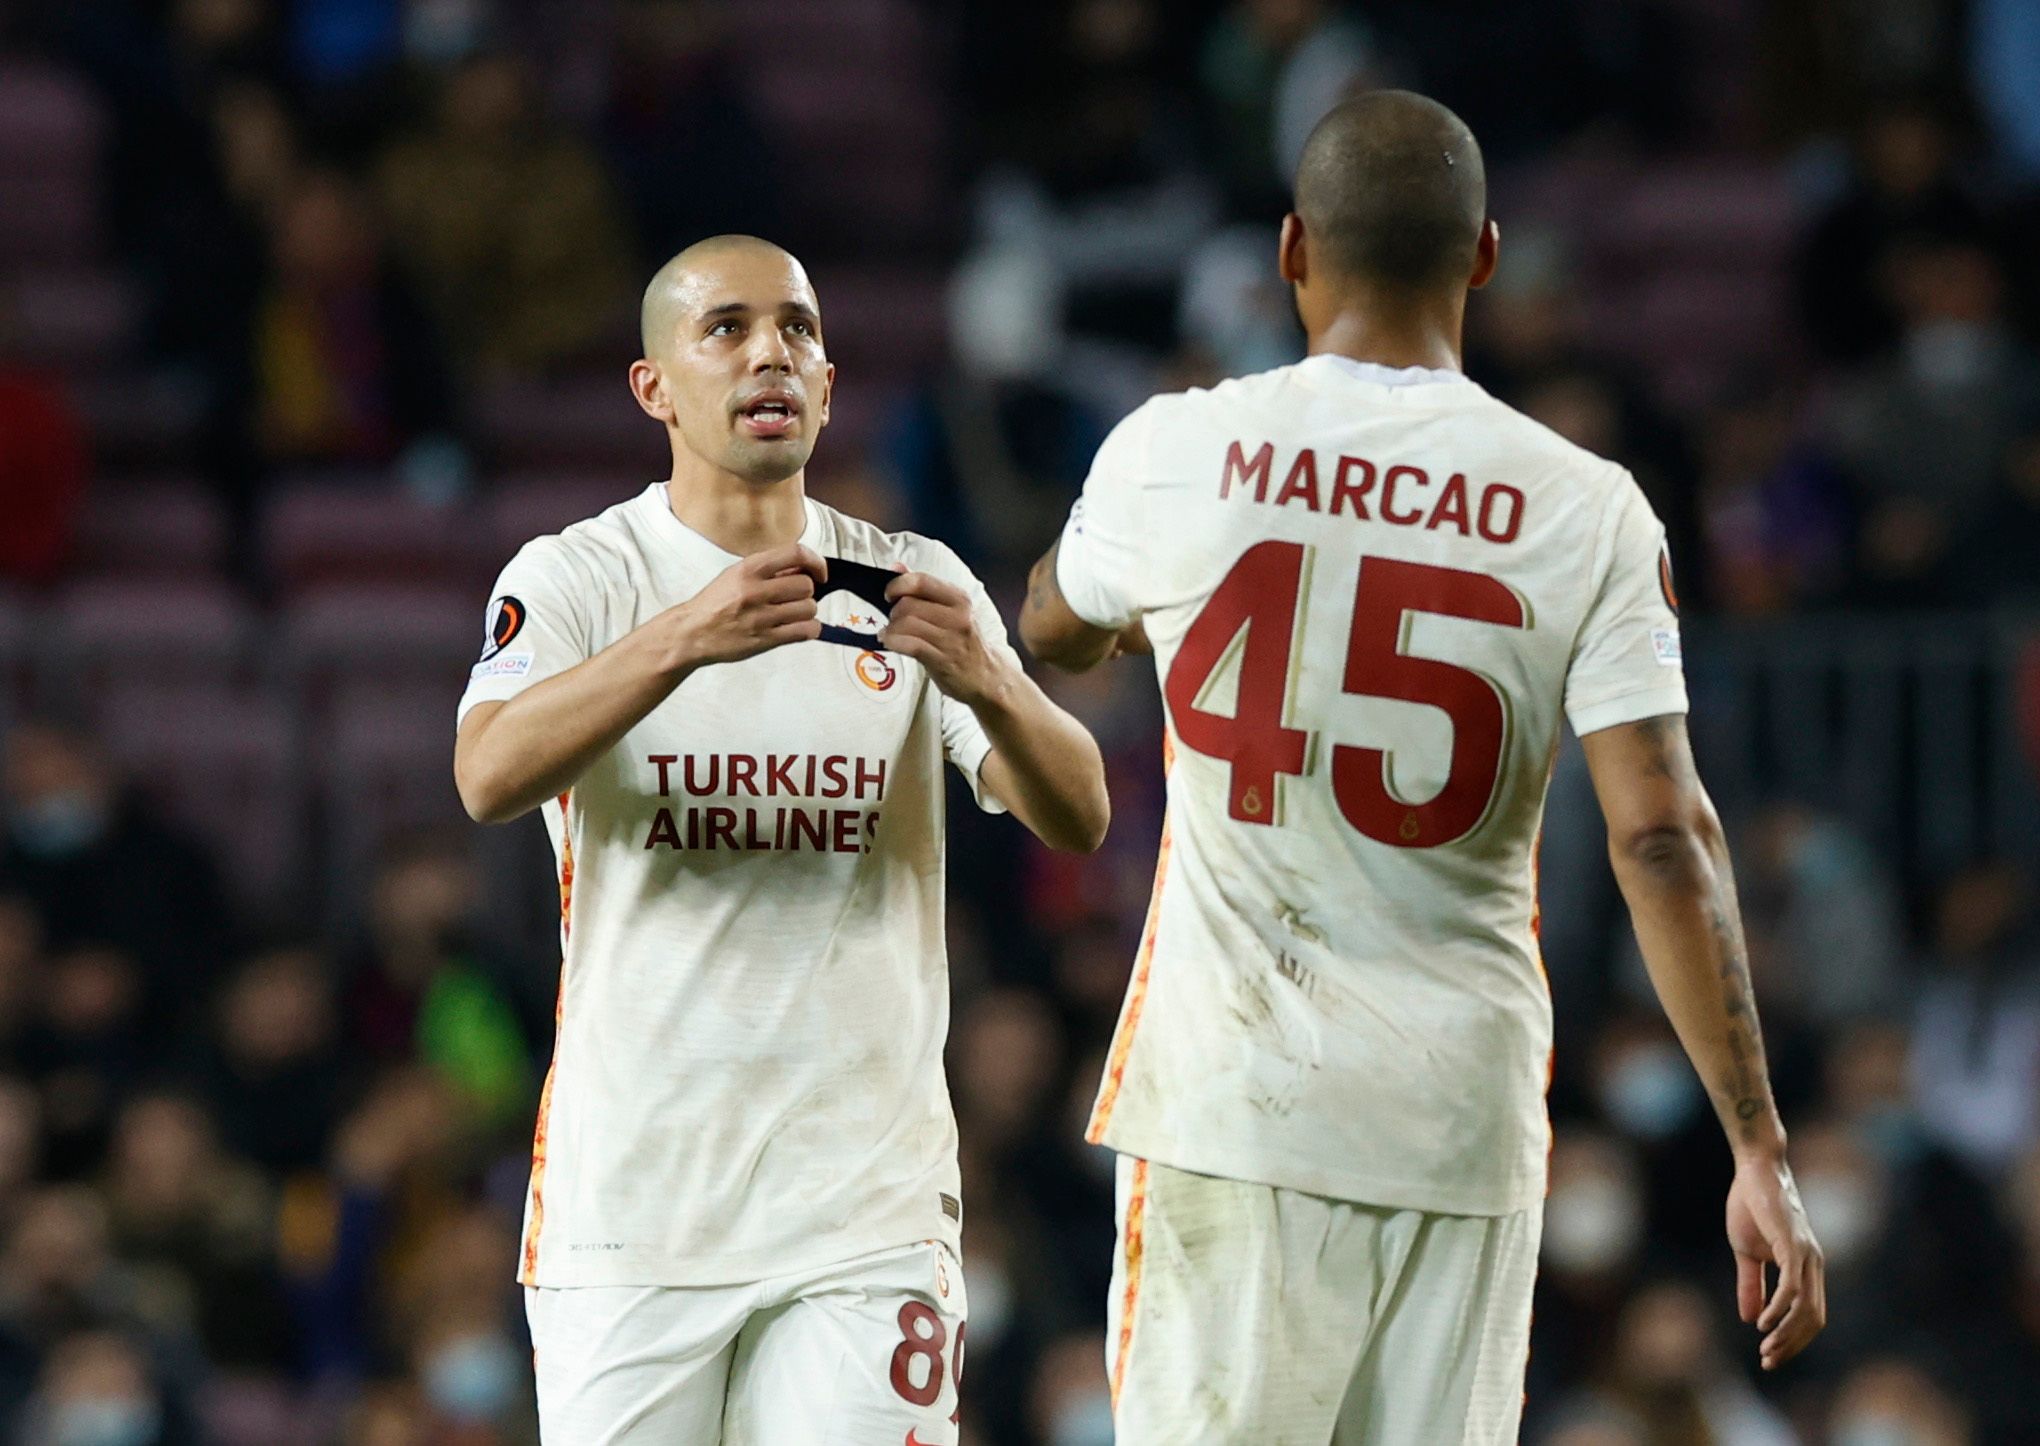 Soccer Football - Europa League - Round of 16 First Leg - FC Barcelona v Galatasaray - Camp Nou, Barcelona, Spain - March 10, 2022 Galatasaray's Sofiane Feghouli and  Marcao during the match REUTERS/Albert Gea